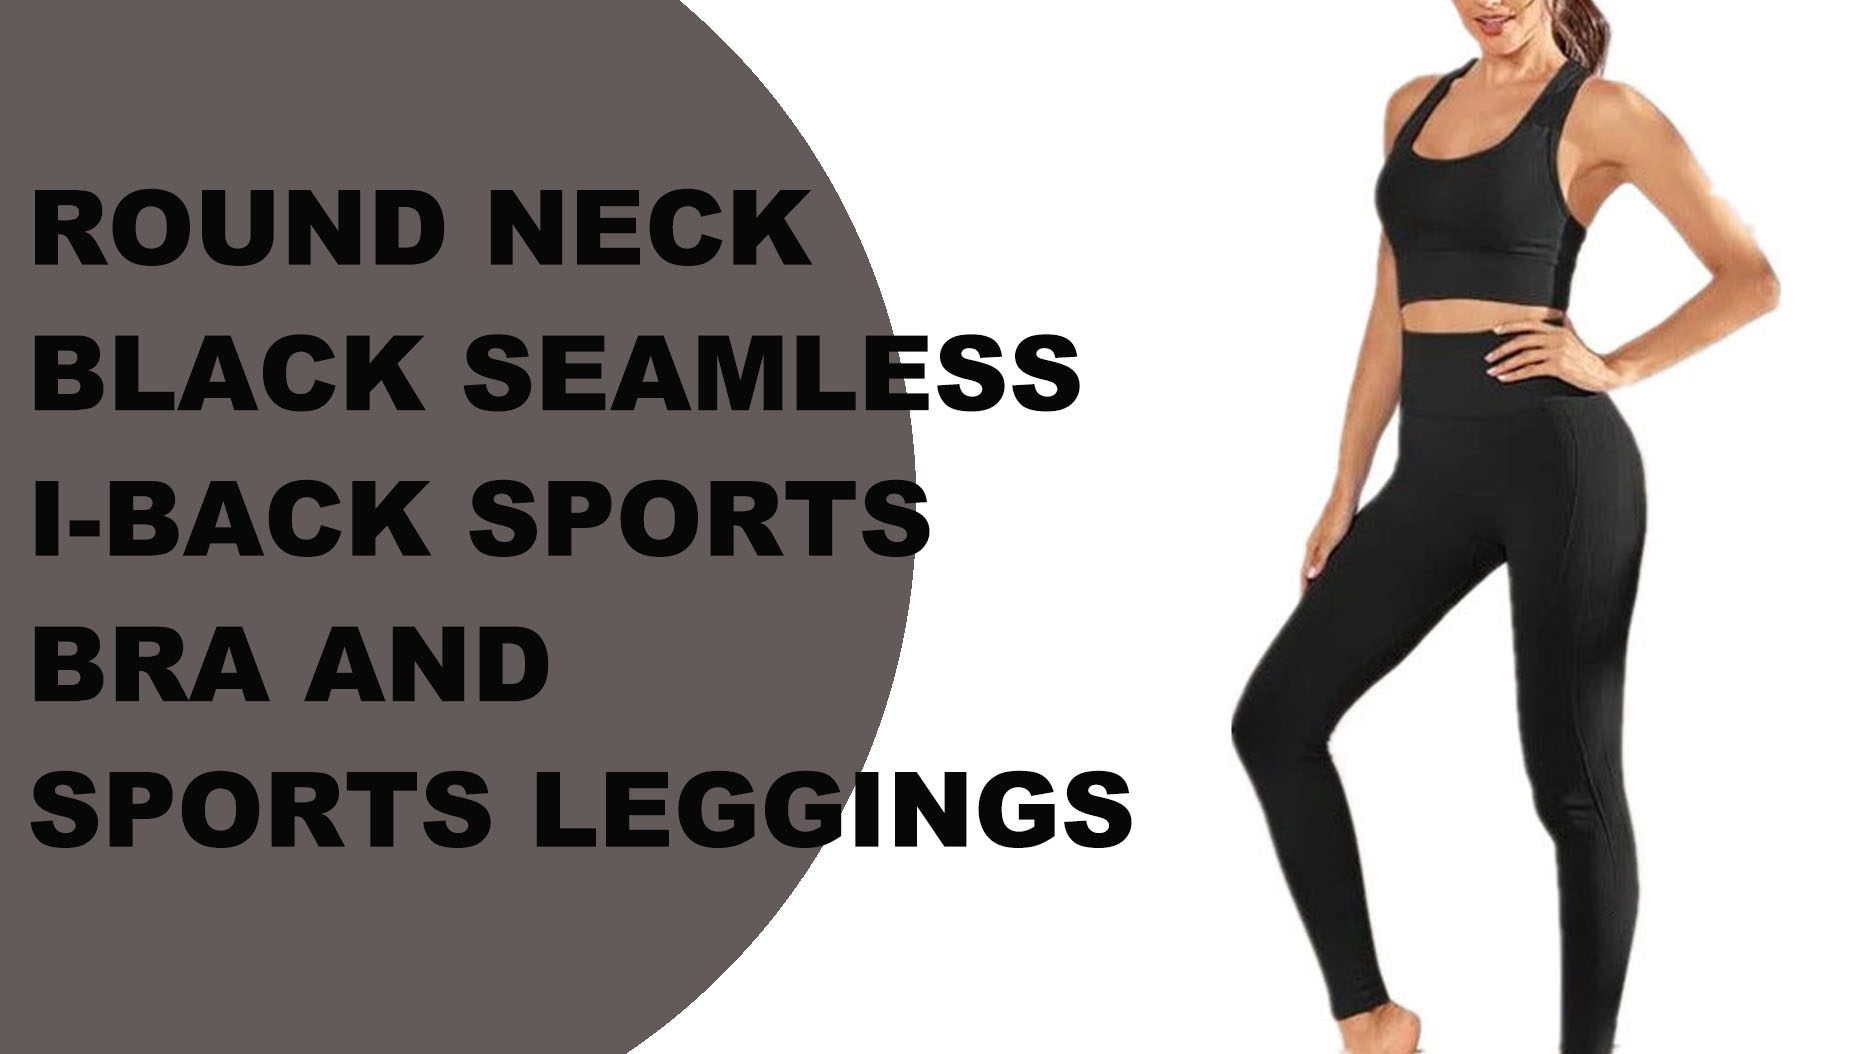 High Quality Round neck black seamless I-back sports bra and sports leggings activewear